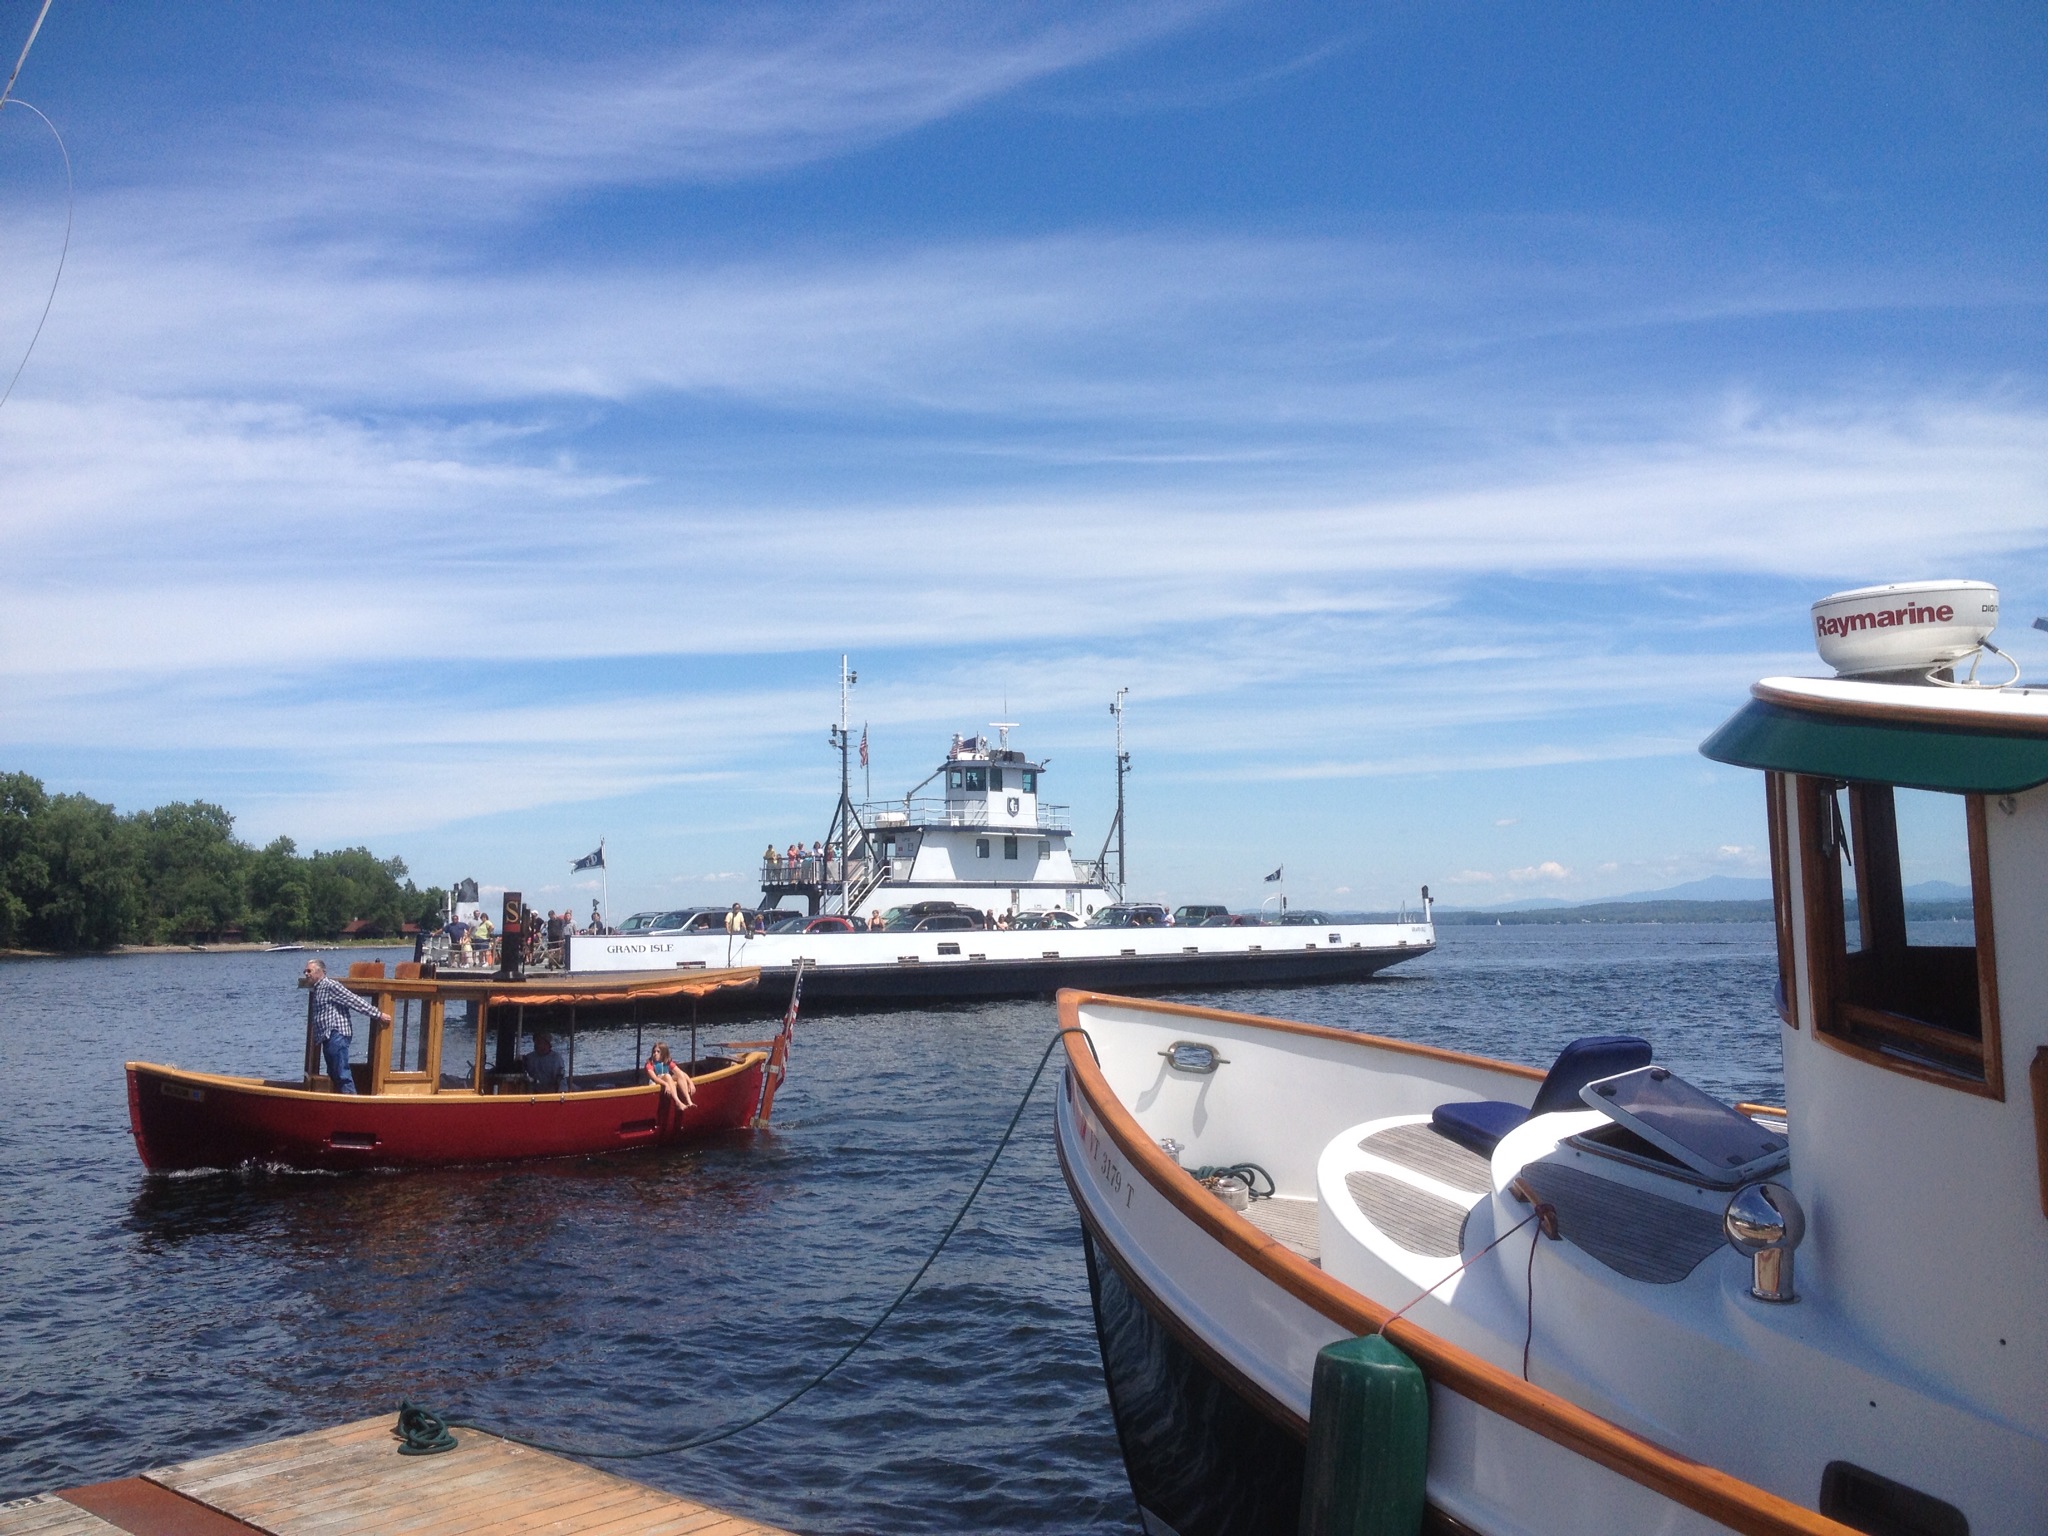 Tugboats playing on Lake Champlain between the Old Dock Restaurant in Essex, NY and the busy ferry dock.